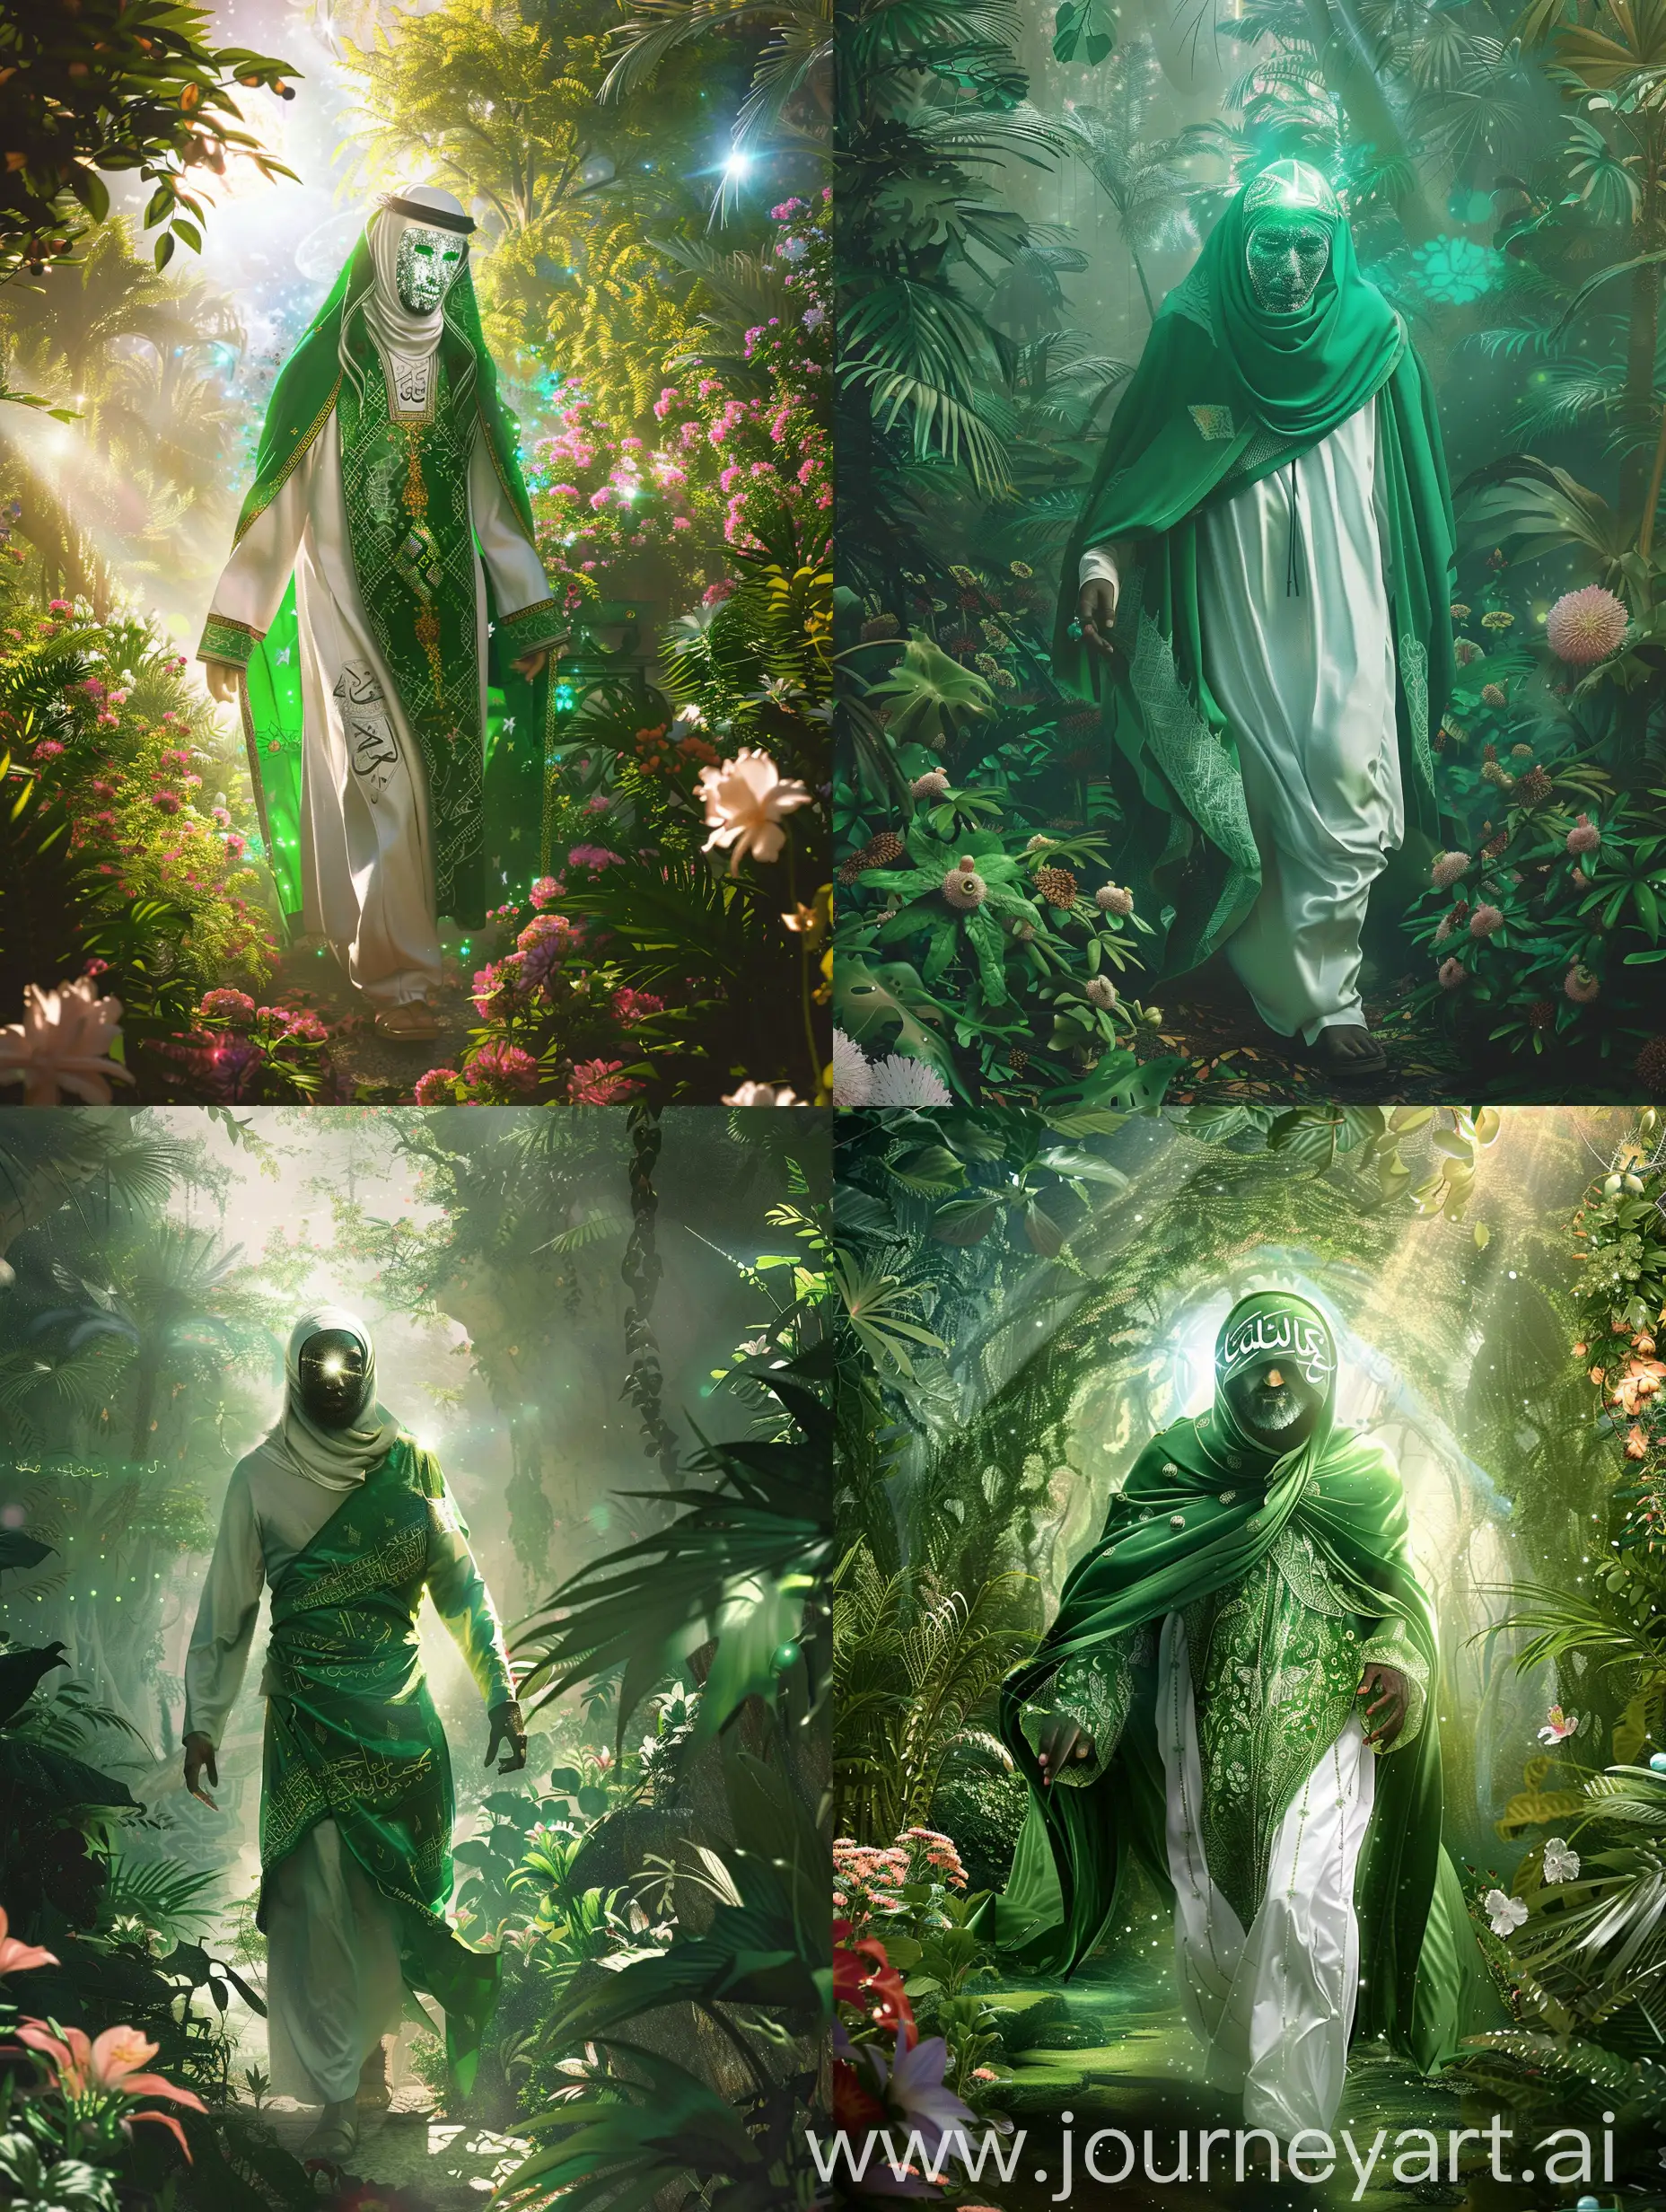 A holly islamic man with green and white arabic clothes and a shining face (no face is recognisable ) walking into a cosmic beautiful jungle and flowers